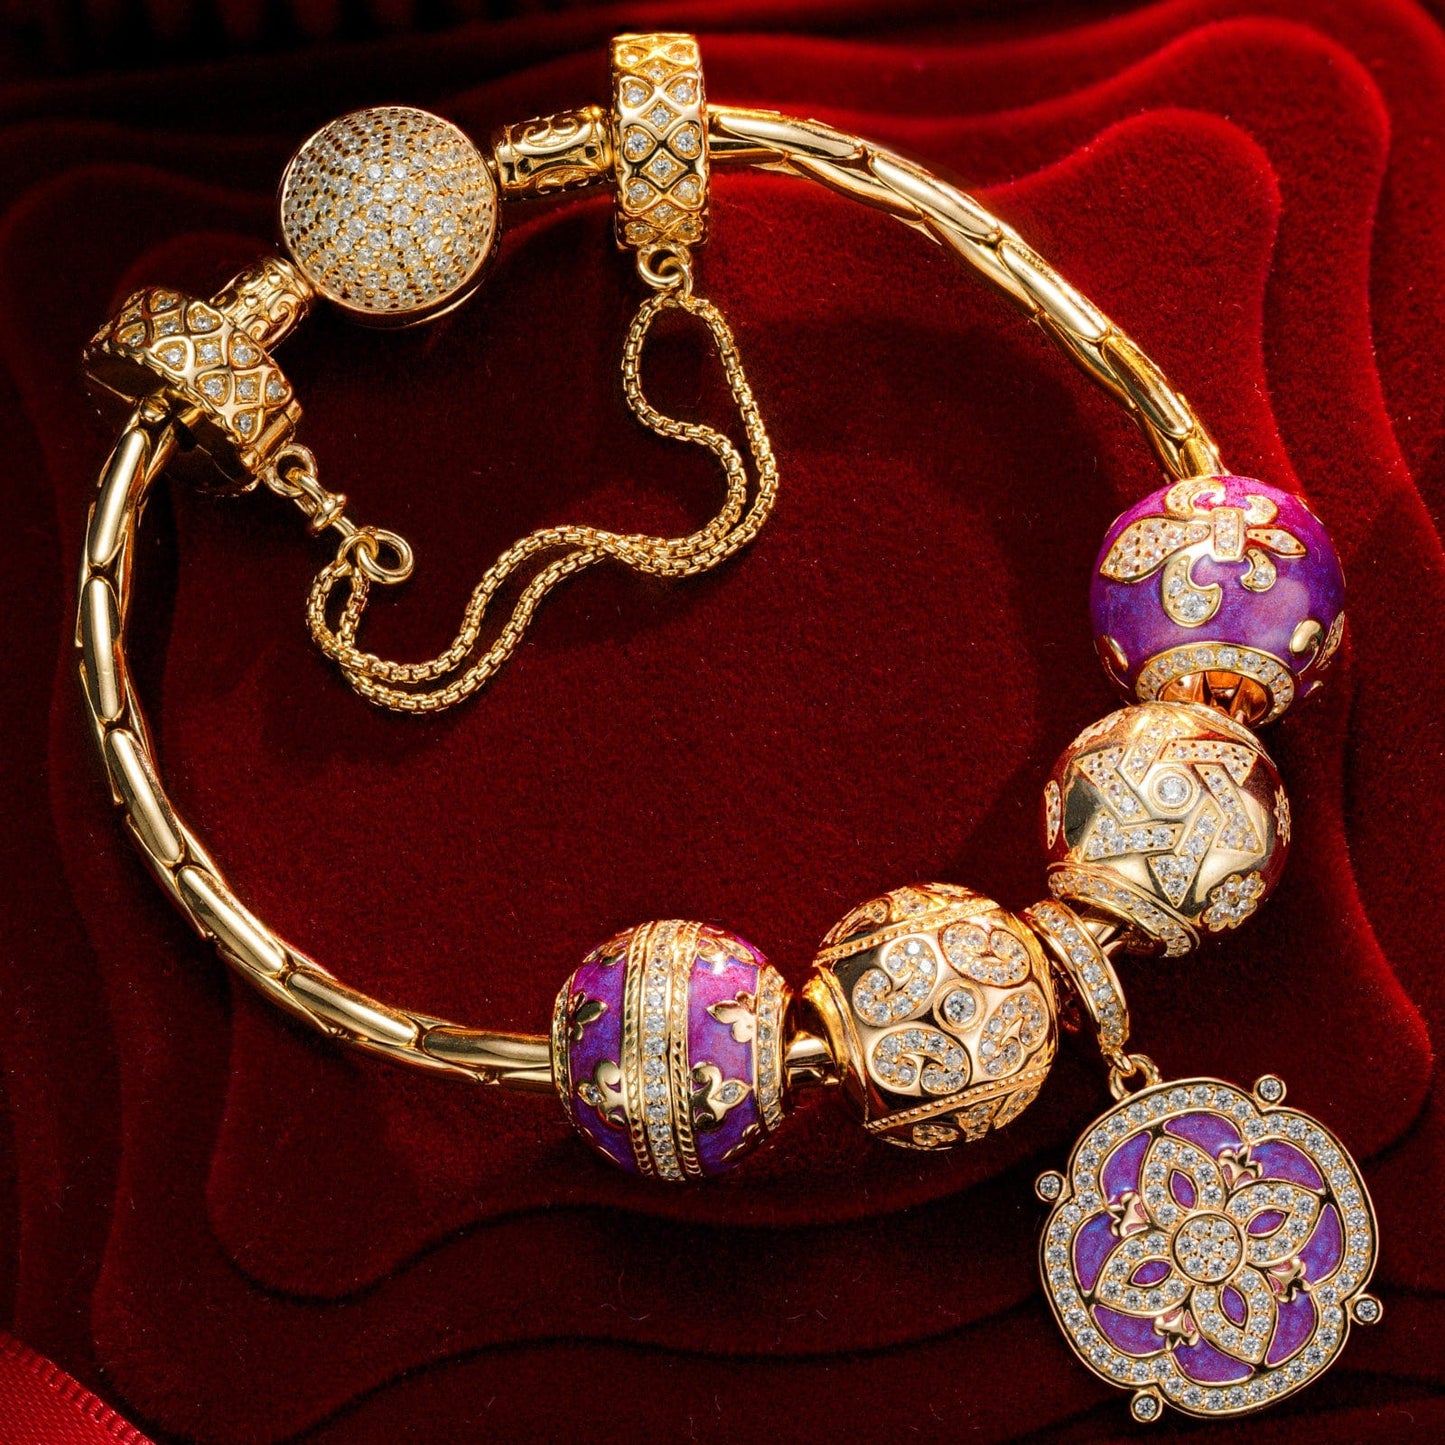 Sterling Silver Lavish Amour Charms Bracelet Set With Enamel In 14K Gold Plated